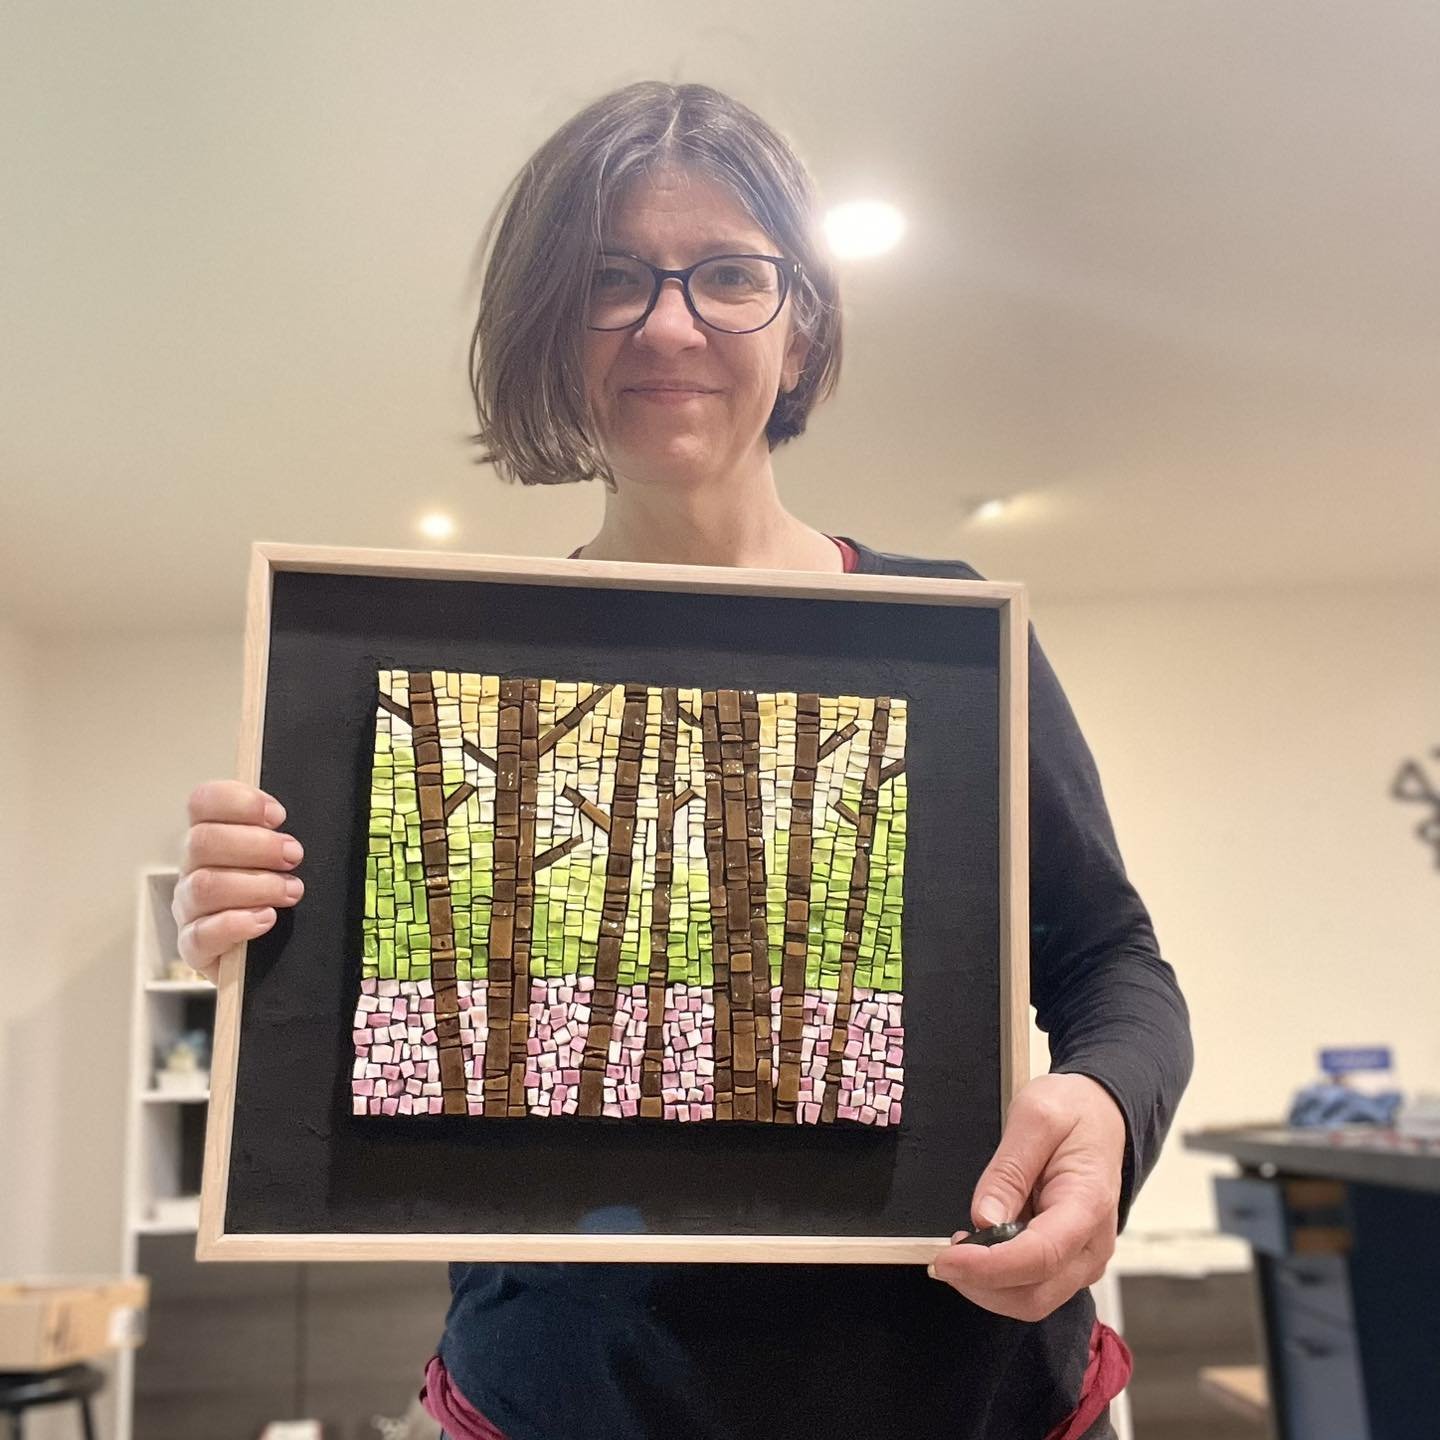 &ldquo;Spring Forest&rdquo; is the first in a new mosaic series, and we&rsquo;re bringing it to Reston this weekend! 🌸

This series of abstract forests will eventually include all four seasons plus lots of other lighting variations. Turns out findin